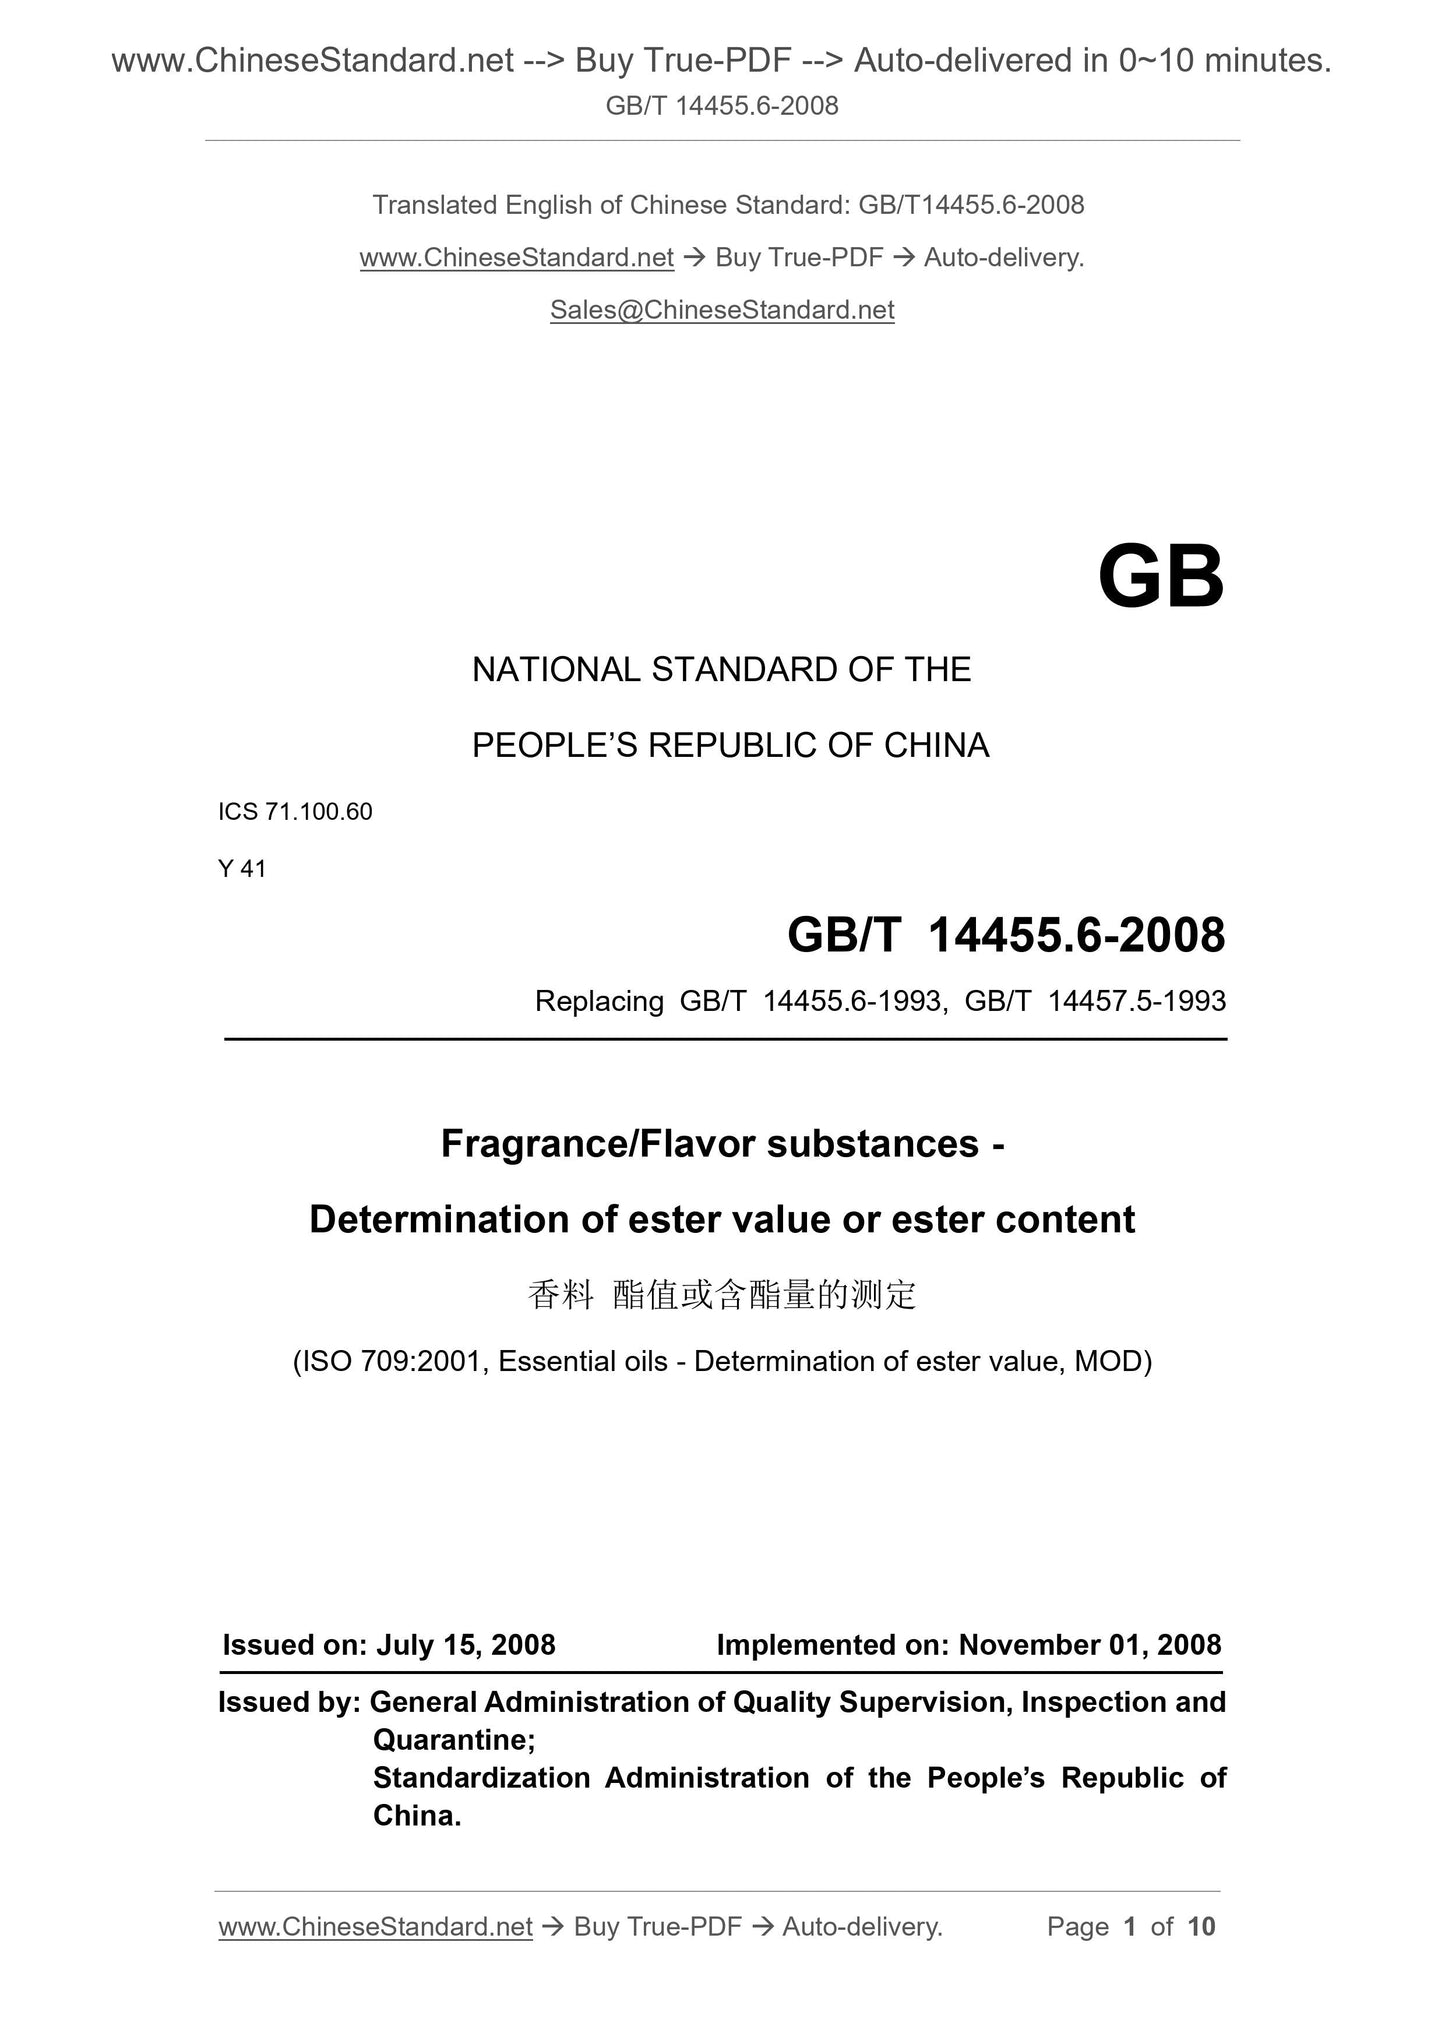 GB/T 14455.6-2008 Page 1